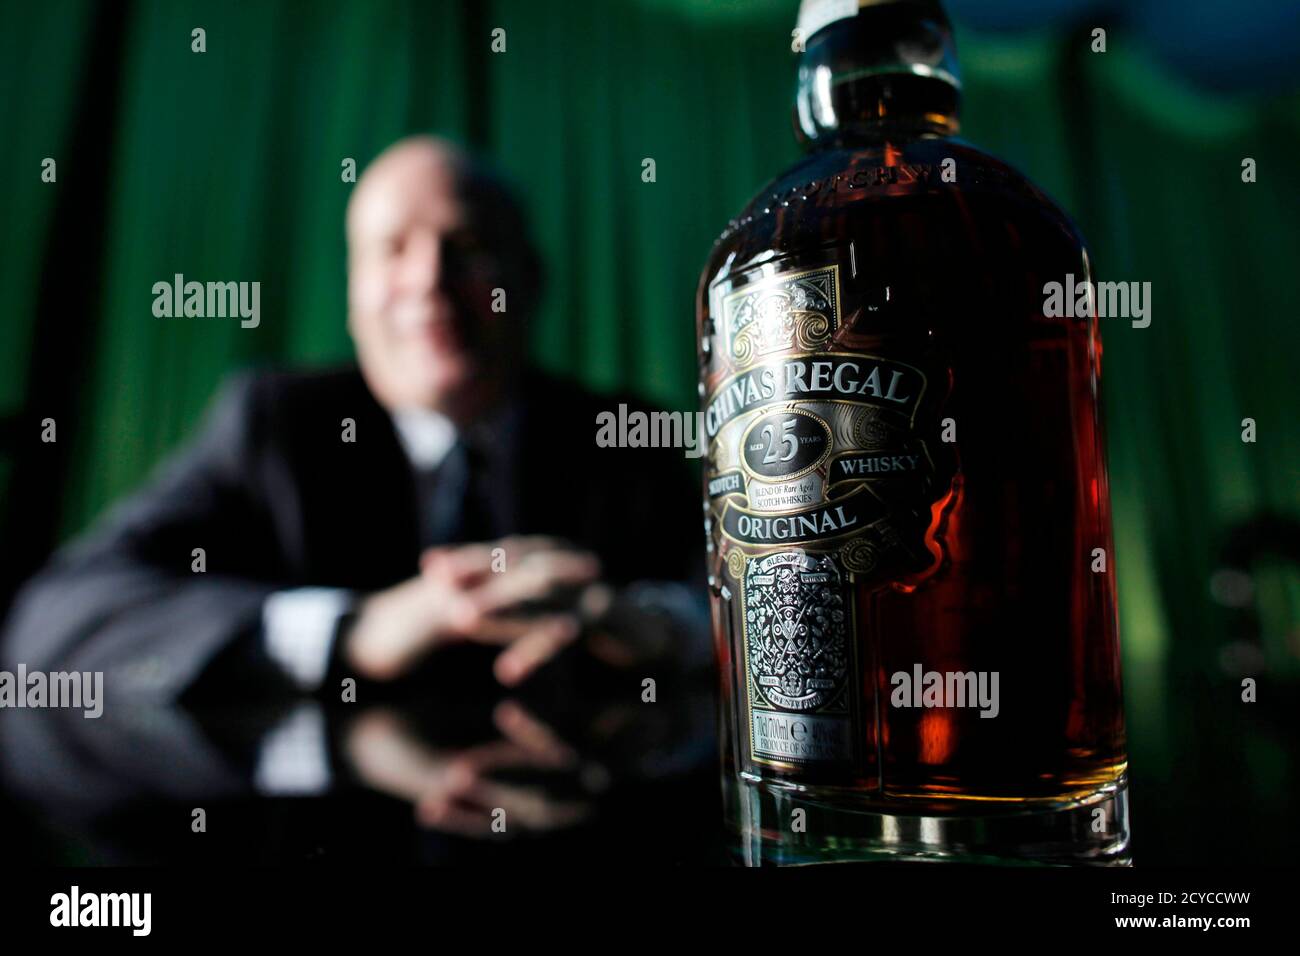 A bottle of Chivas Regal sits on a table in front of Darren Hosie, regional manager of Chivas Brothers, as he is interviewed by Reuters in Shanghai in this December 8, 2010 file photo.  Born and bred in Glasgow, 37-year-old Hosie has spent the past seven years working for scotch whisky giant Pernod Ricard and since August 2007, he has lived in China as international brand ambassador for the firm's top whisky brands Chivas Regal, Ballantine's and The Glenlivet. Hosie is well accustomed to the tastes and whims of the country's new business elite -- the legions of bankers, entrepreneurs, traders  Stock Photo